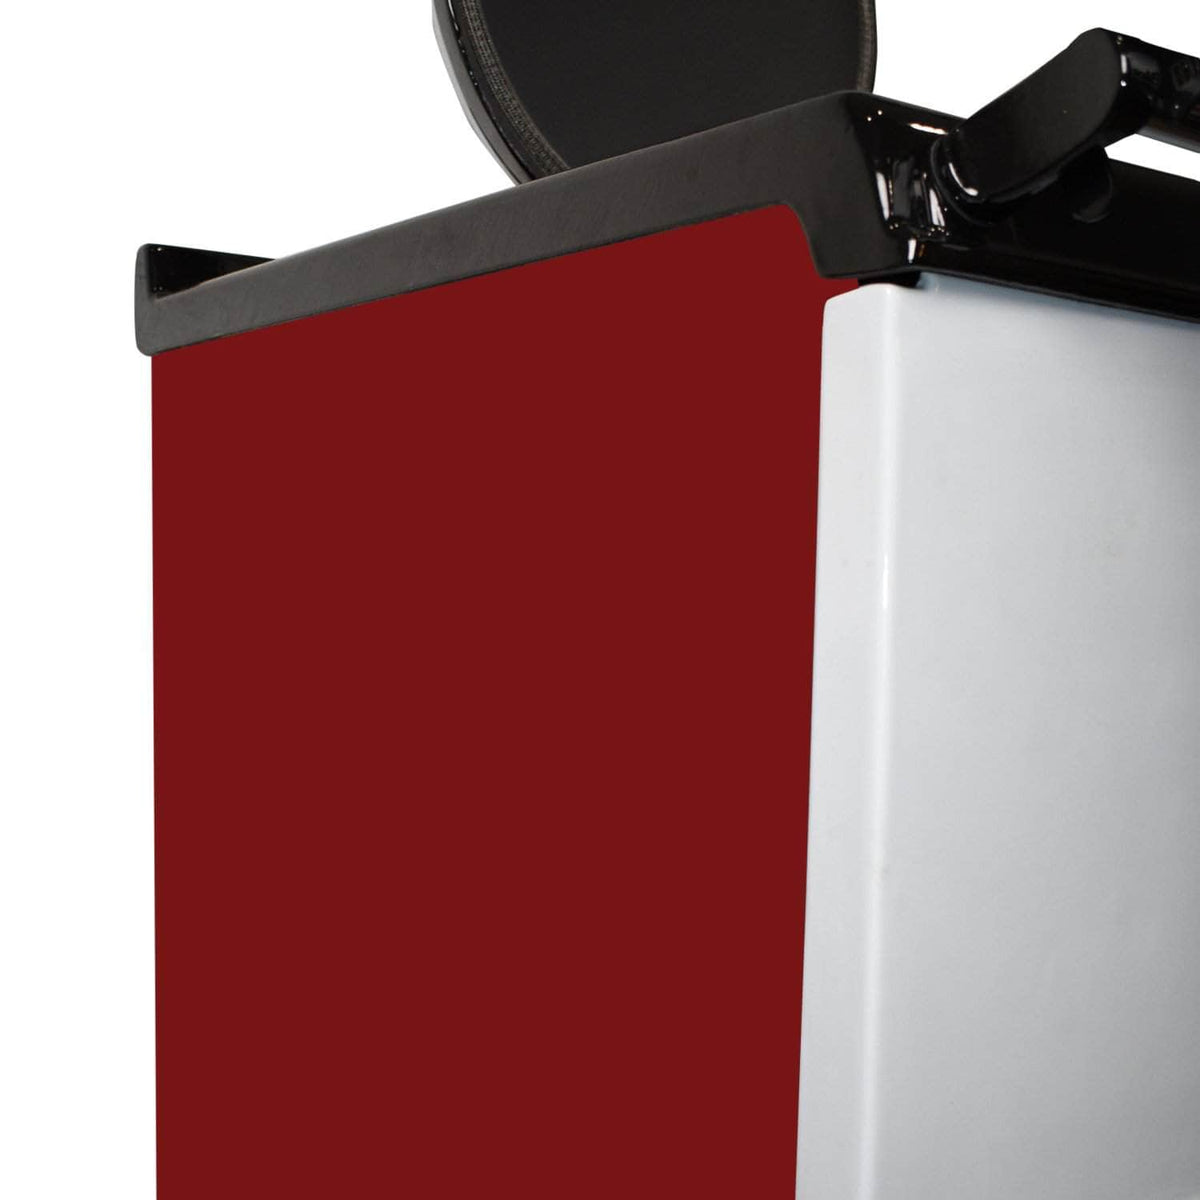 Side panels for use with &#39;Standard&#39; Aga range cooker Red